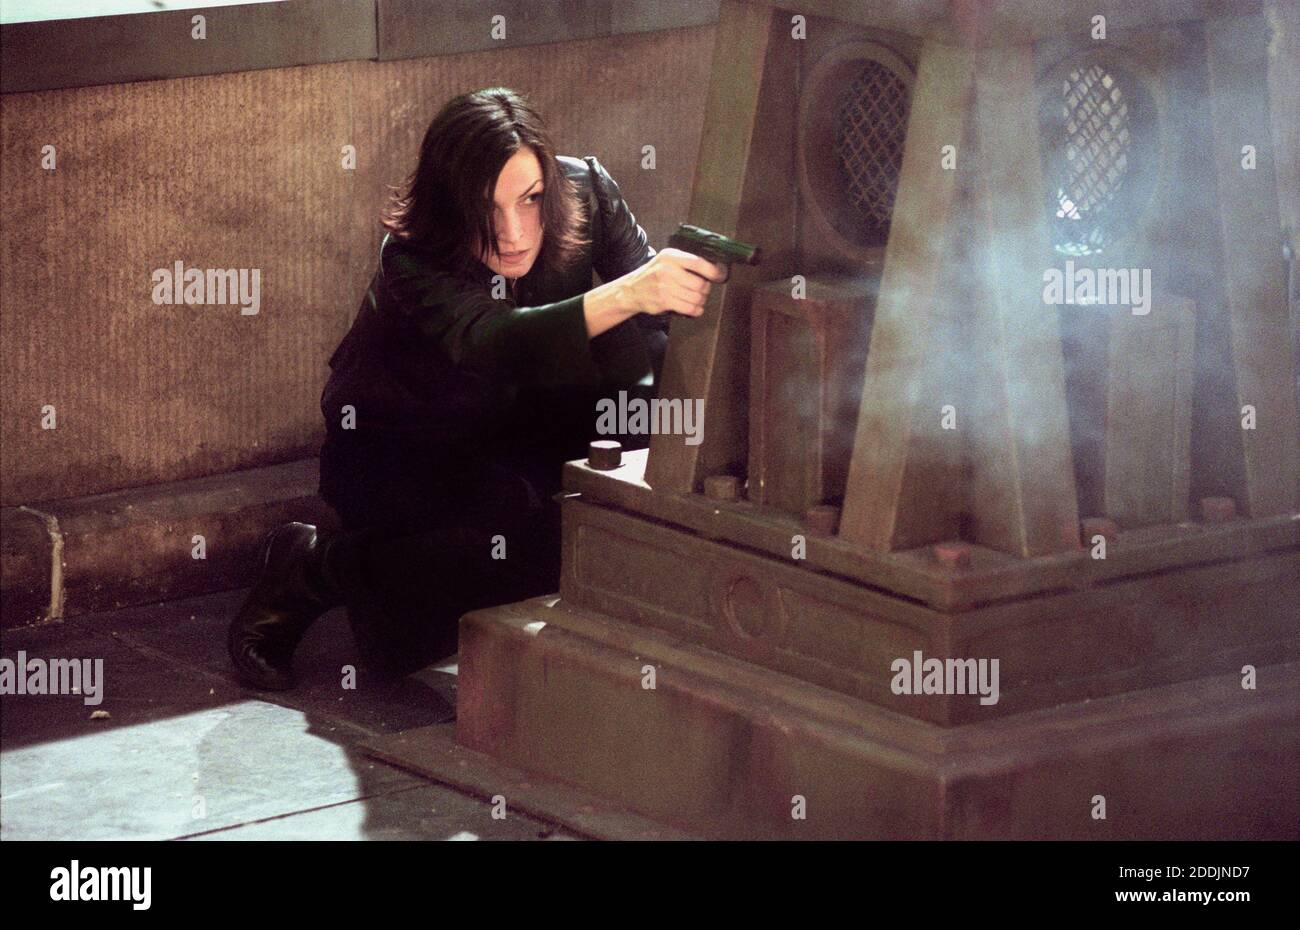 Famke Janssen, 'I-Spy' (2002)  Photo credit: Columbia Pictures / The Hollywood Archive / File Reference # 34078-0360FSTHA Stock Photo